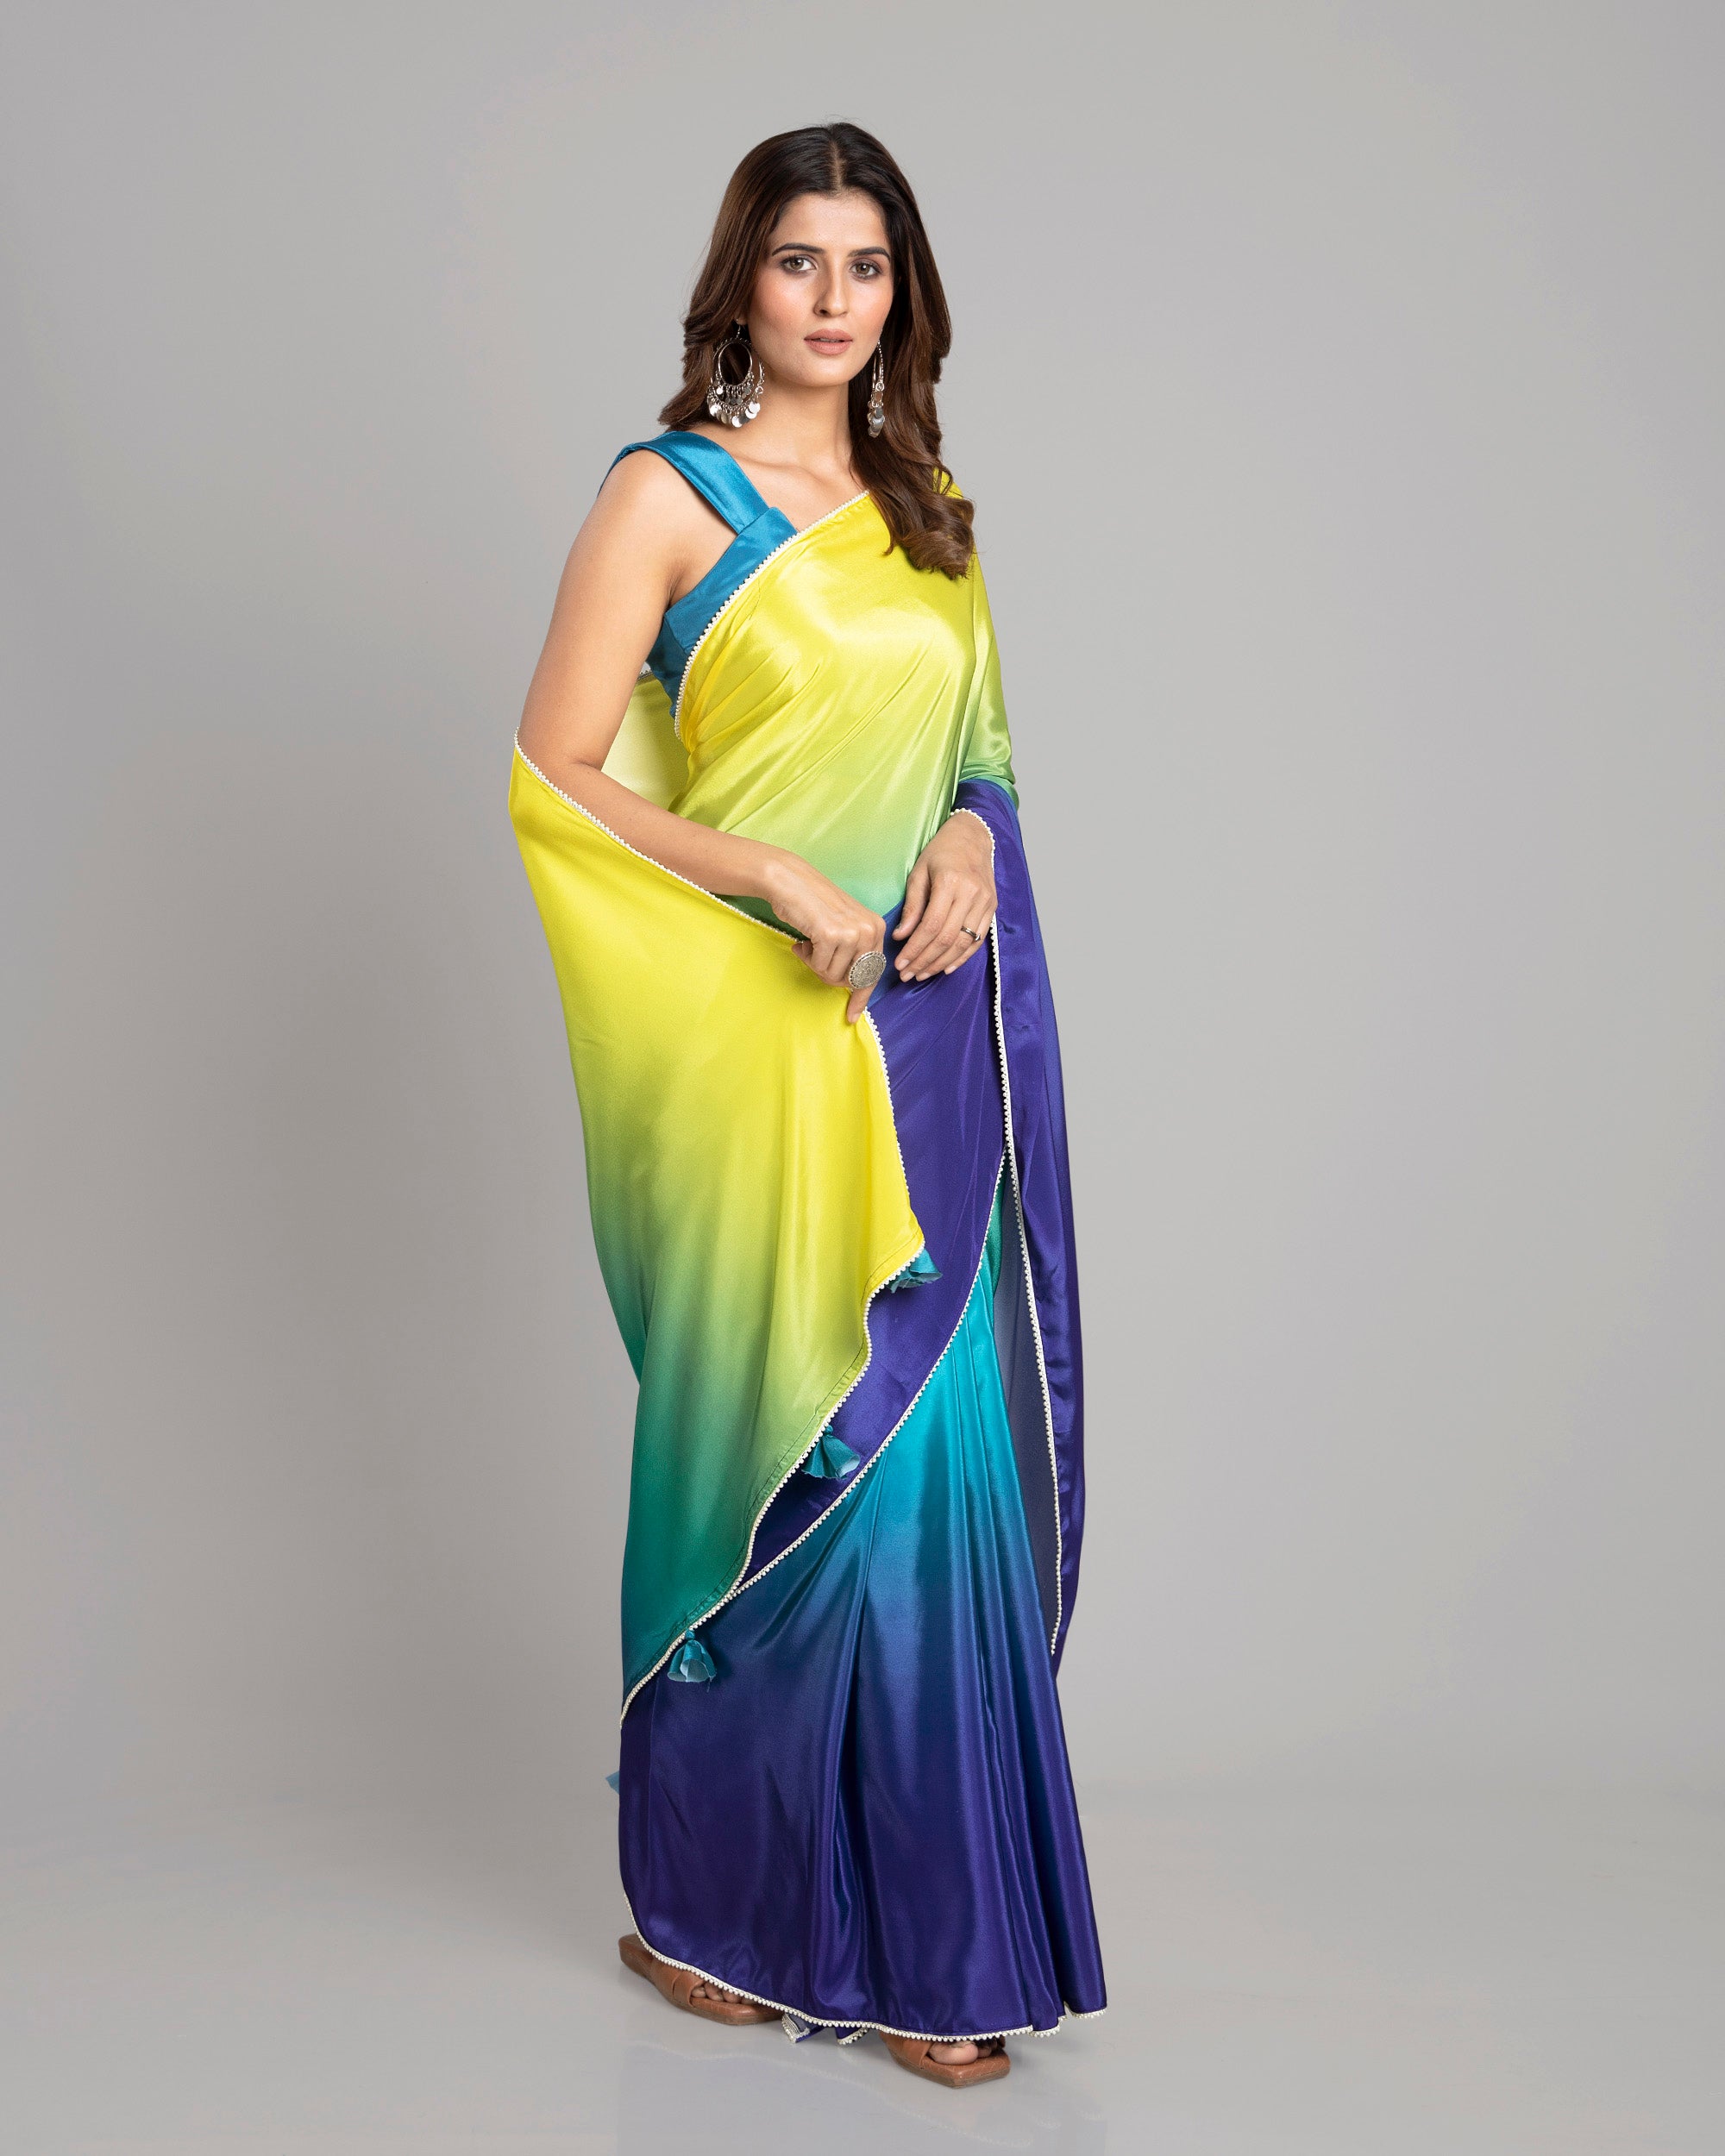 21 Half Saree Color Combinations That You Didn't Think of Earlier • Keep Me  Stylish | Saree color combinations, Half saree designs, Half saree lehenga